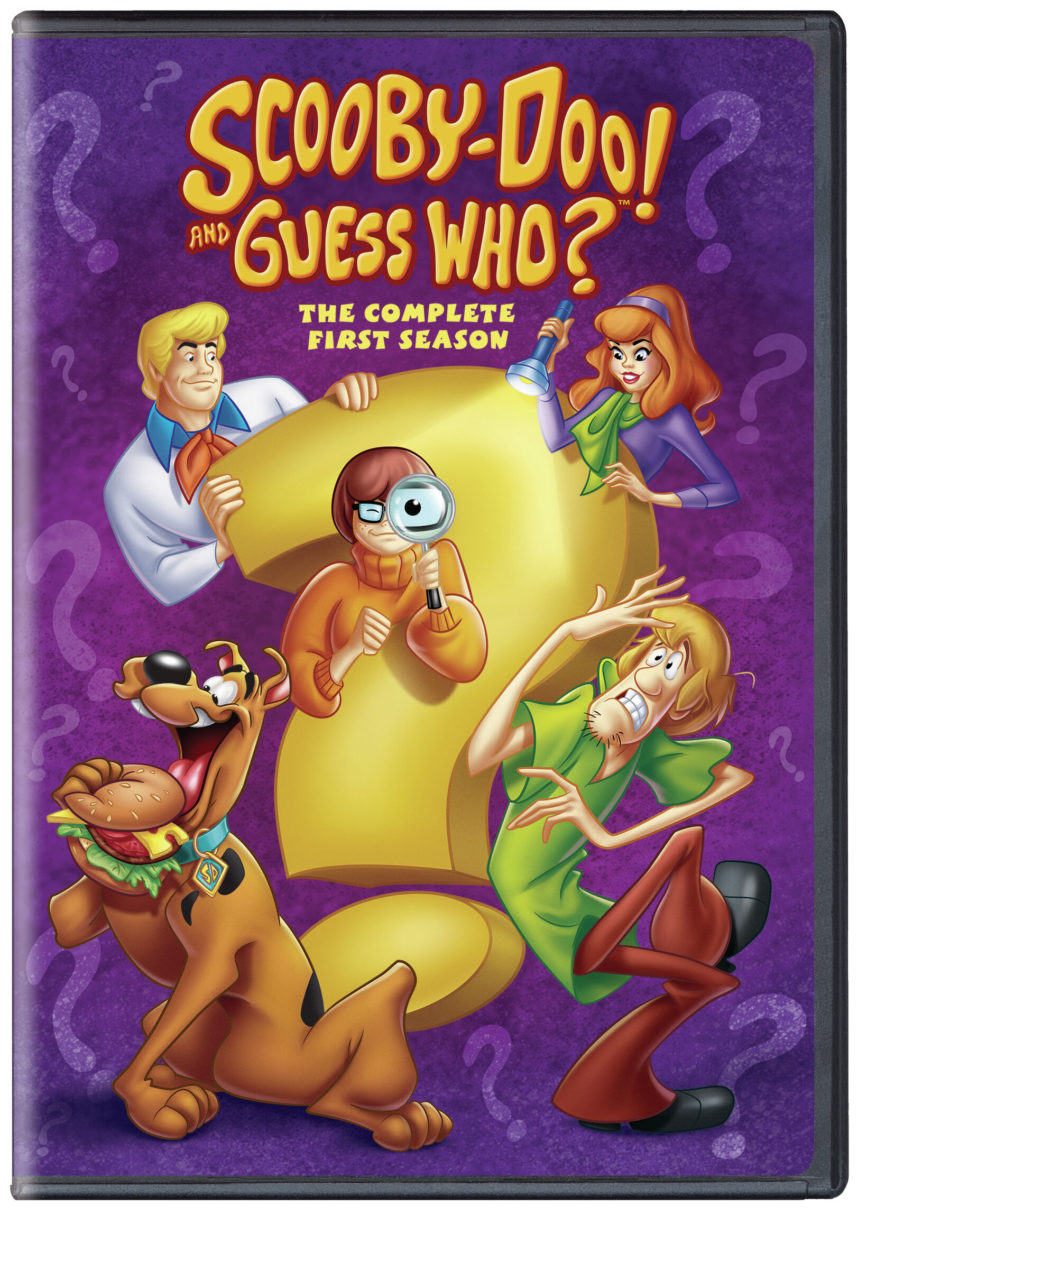 Scooby-Doo! And Guess Who?: The Complete First Season DVD cover (Warner Bros. Home Entertainment)